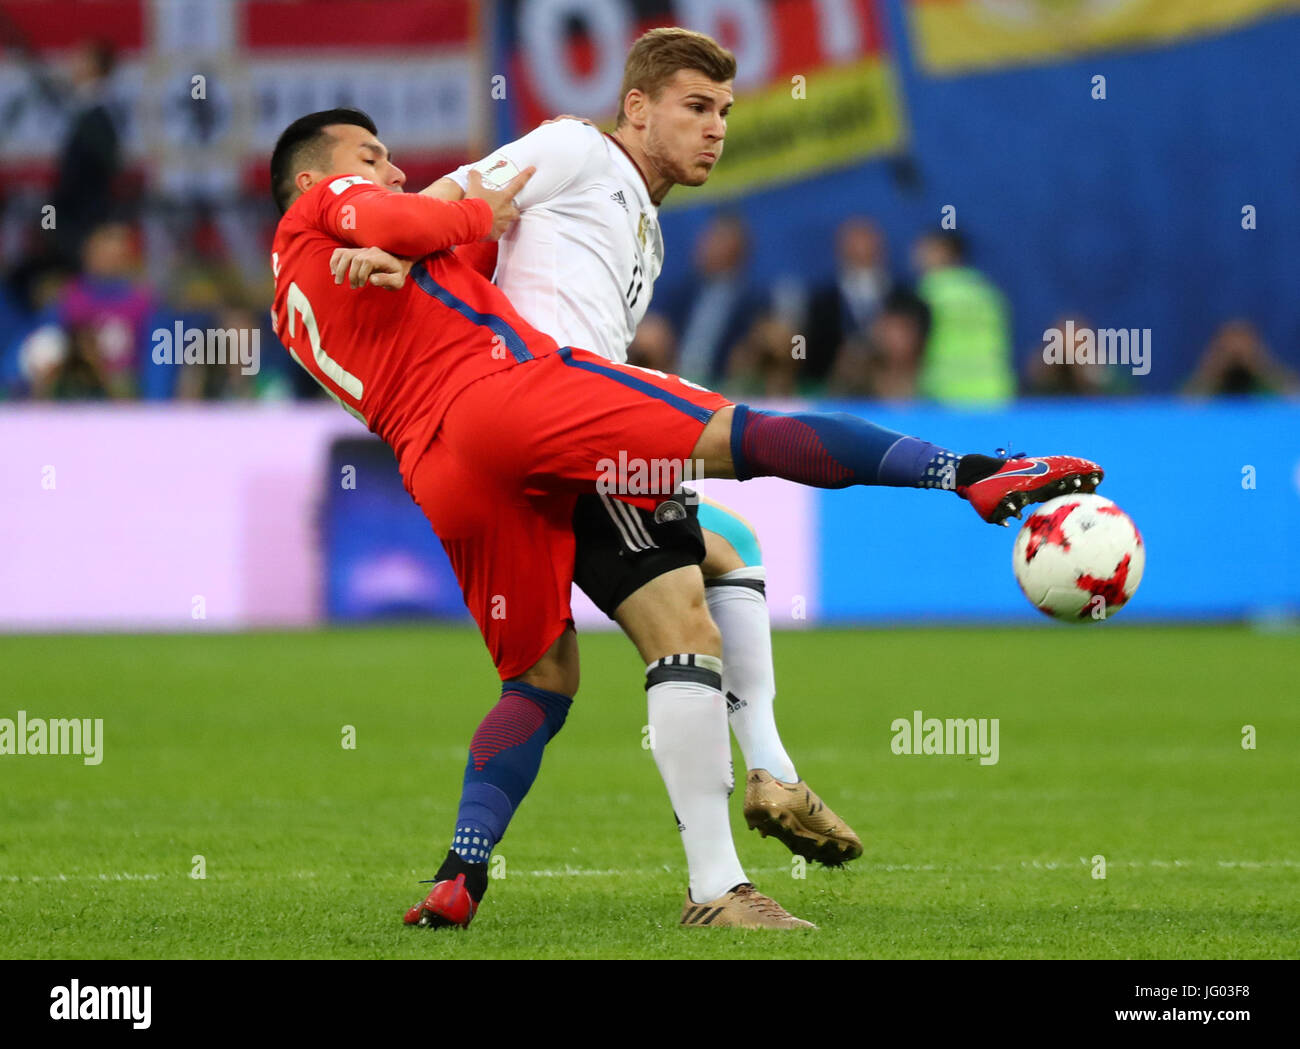 Saint Petersburg, Russia. 2nd July, 2017. Chile's Gary Medel (l) and Germany's Timo Werner in action during the Confederations Cup finale between Chile and Germany at the Saint Petersburg Stadium in Saint Petersburg, Russia, 2 July 2017. Photo: Christian Charisius/dpa/Alamy Live News Stock Photo